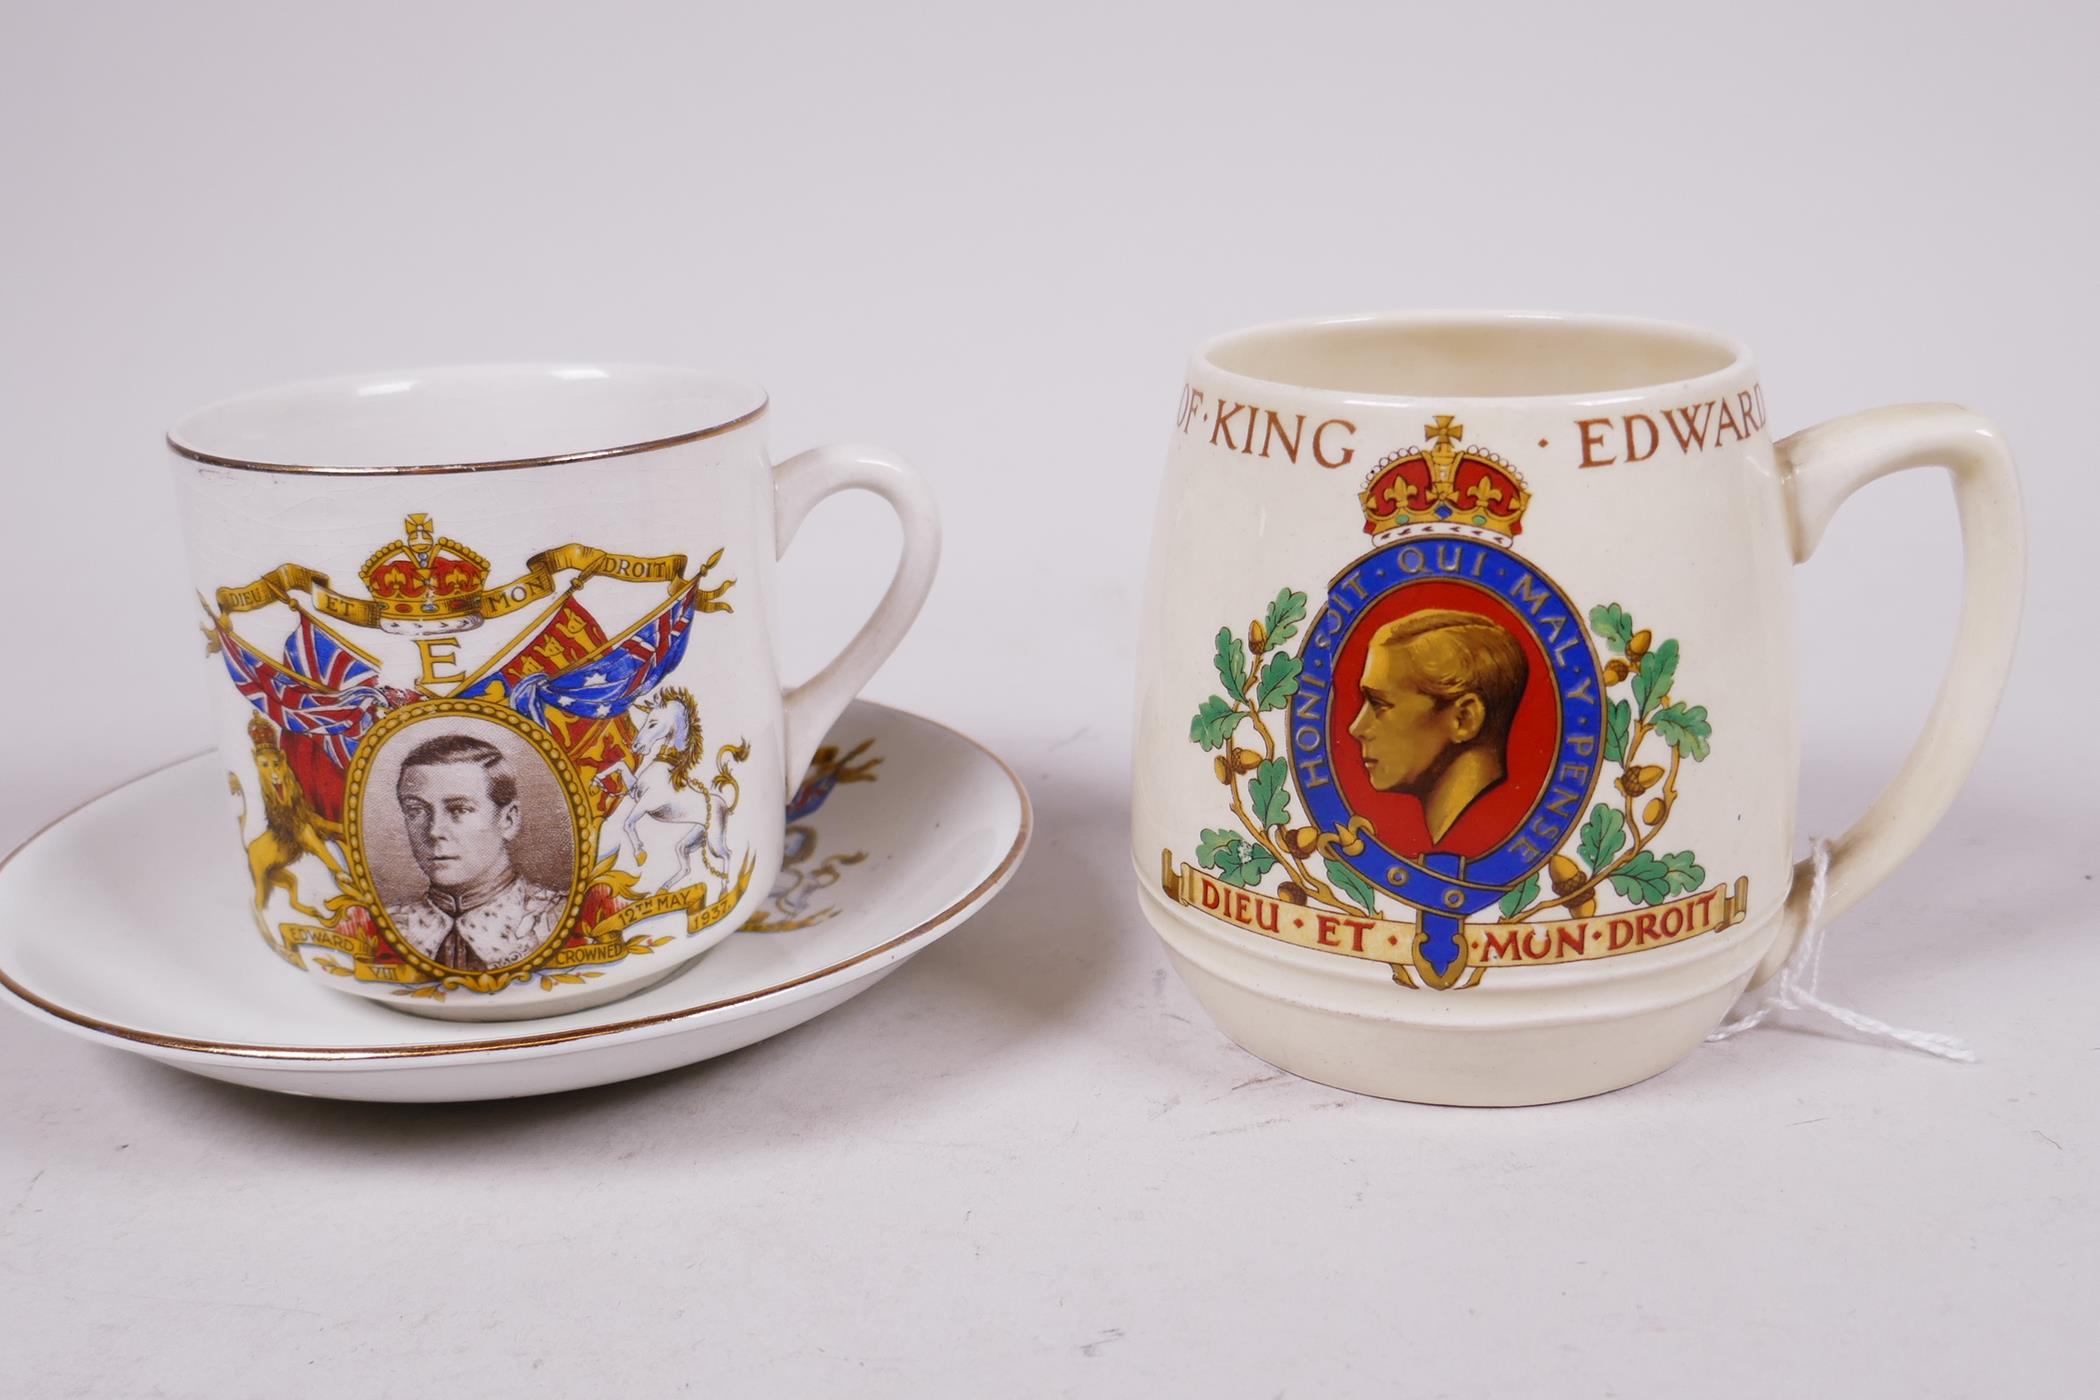 Rare commemoratives issued in 1936 for the Coronation of Edward VIII which did not take place - Image 8 of 10